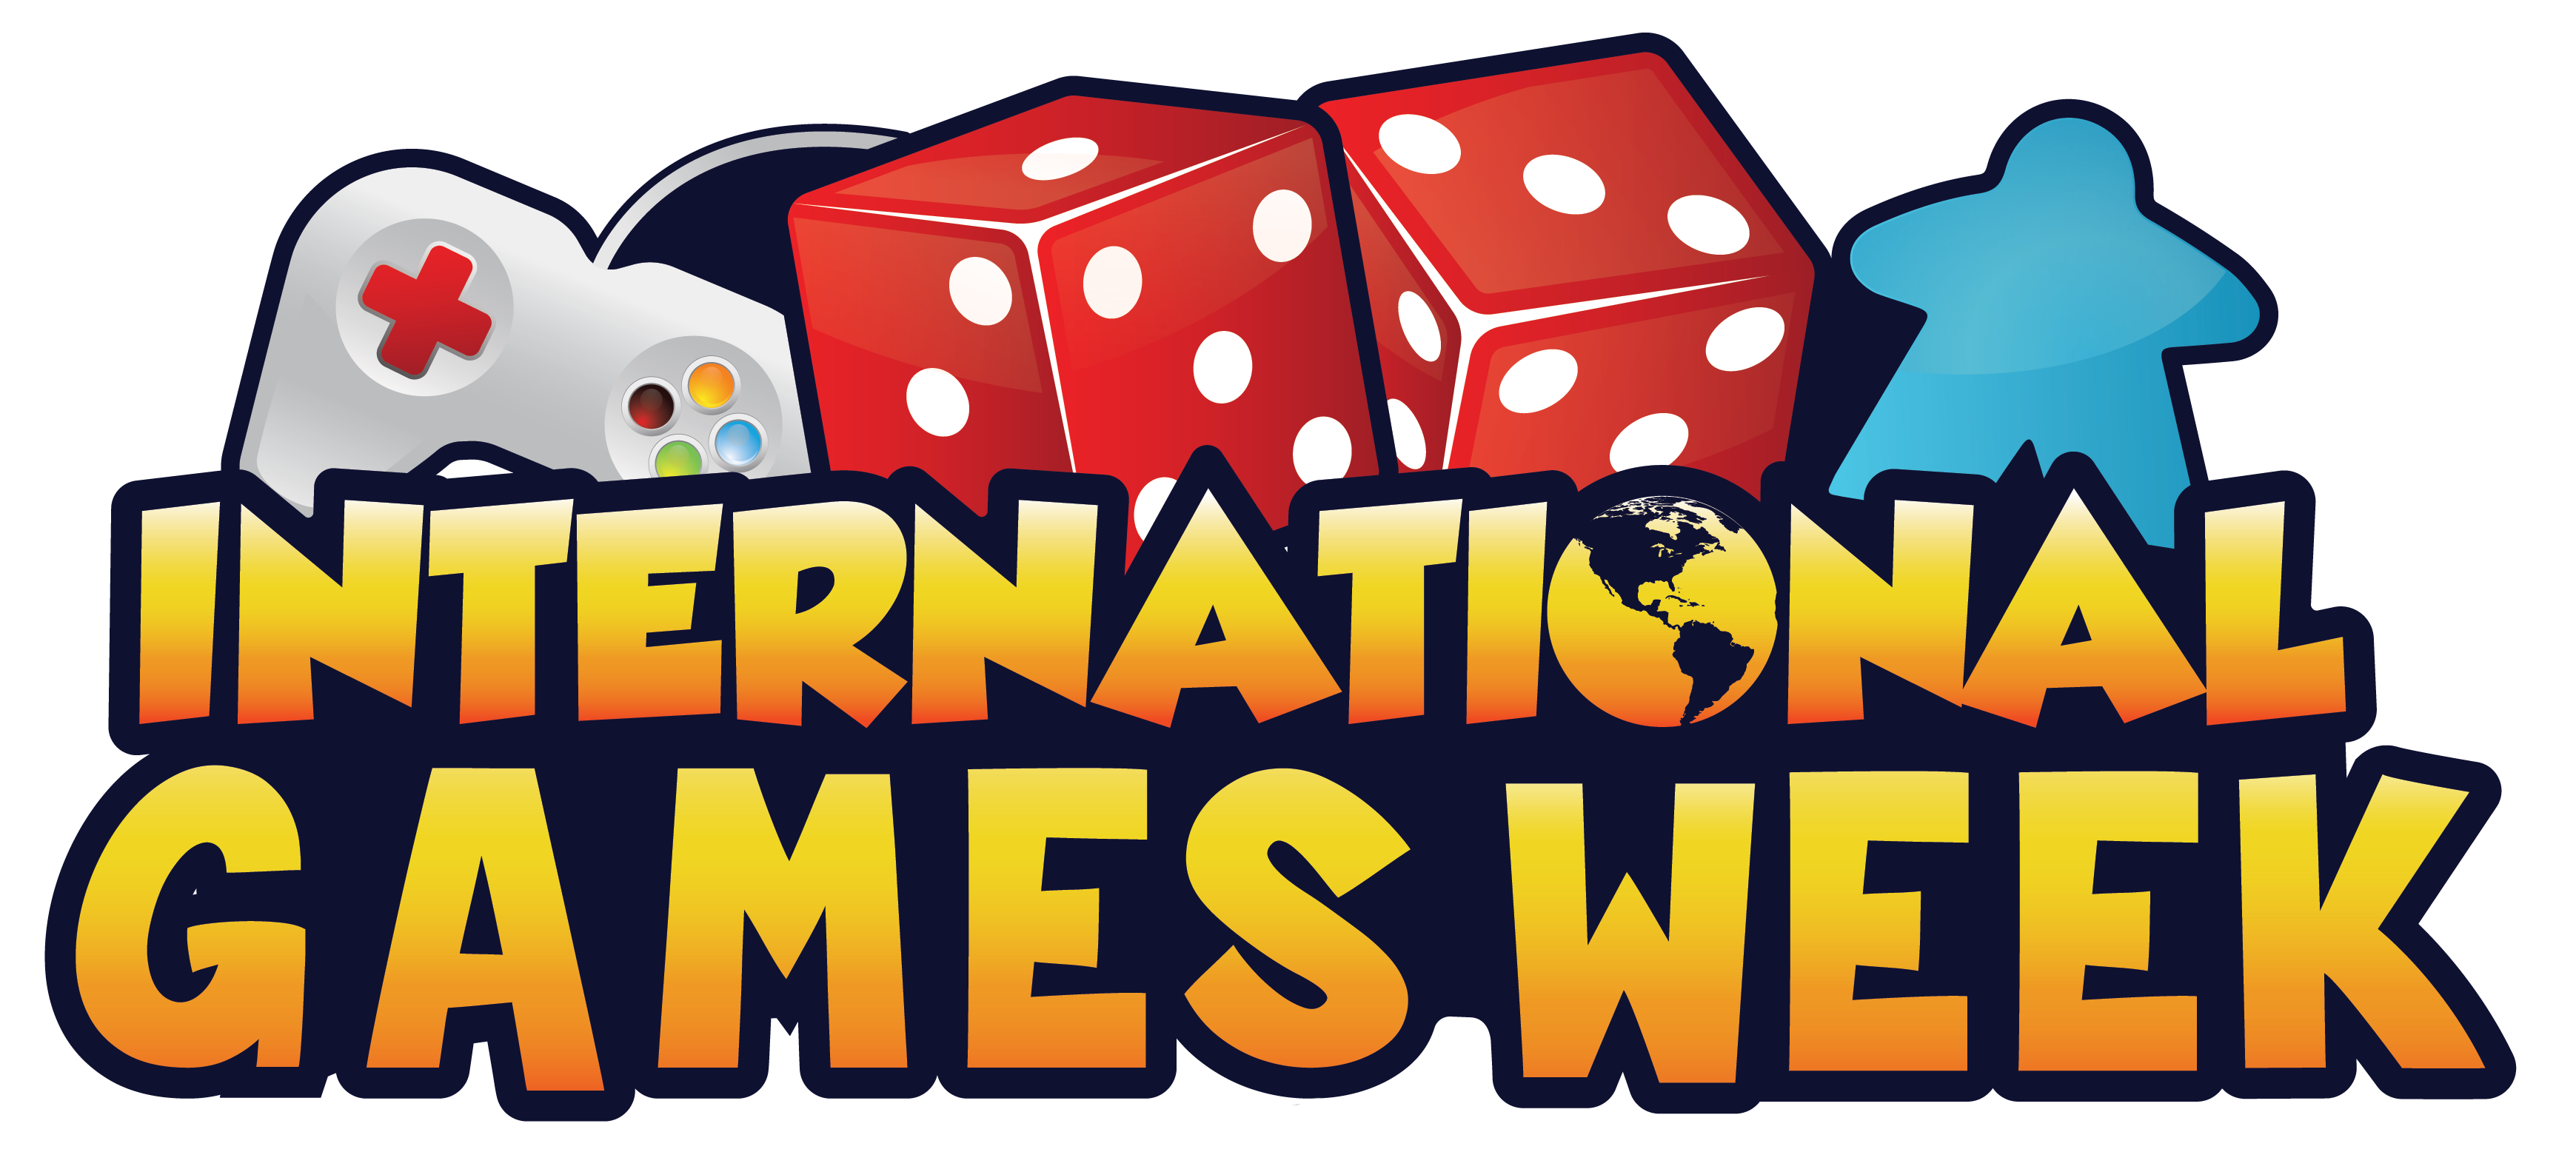 Get your game on with International Games Week